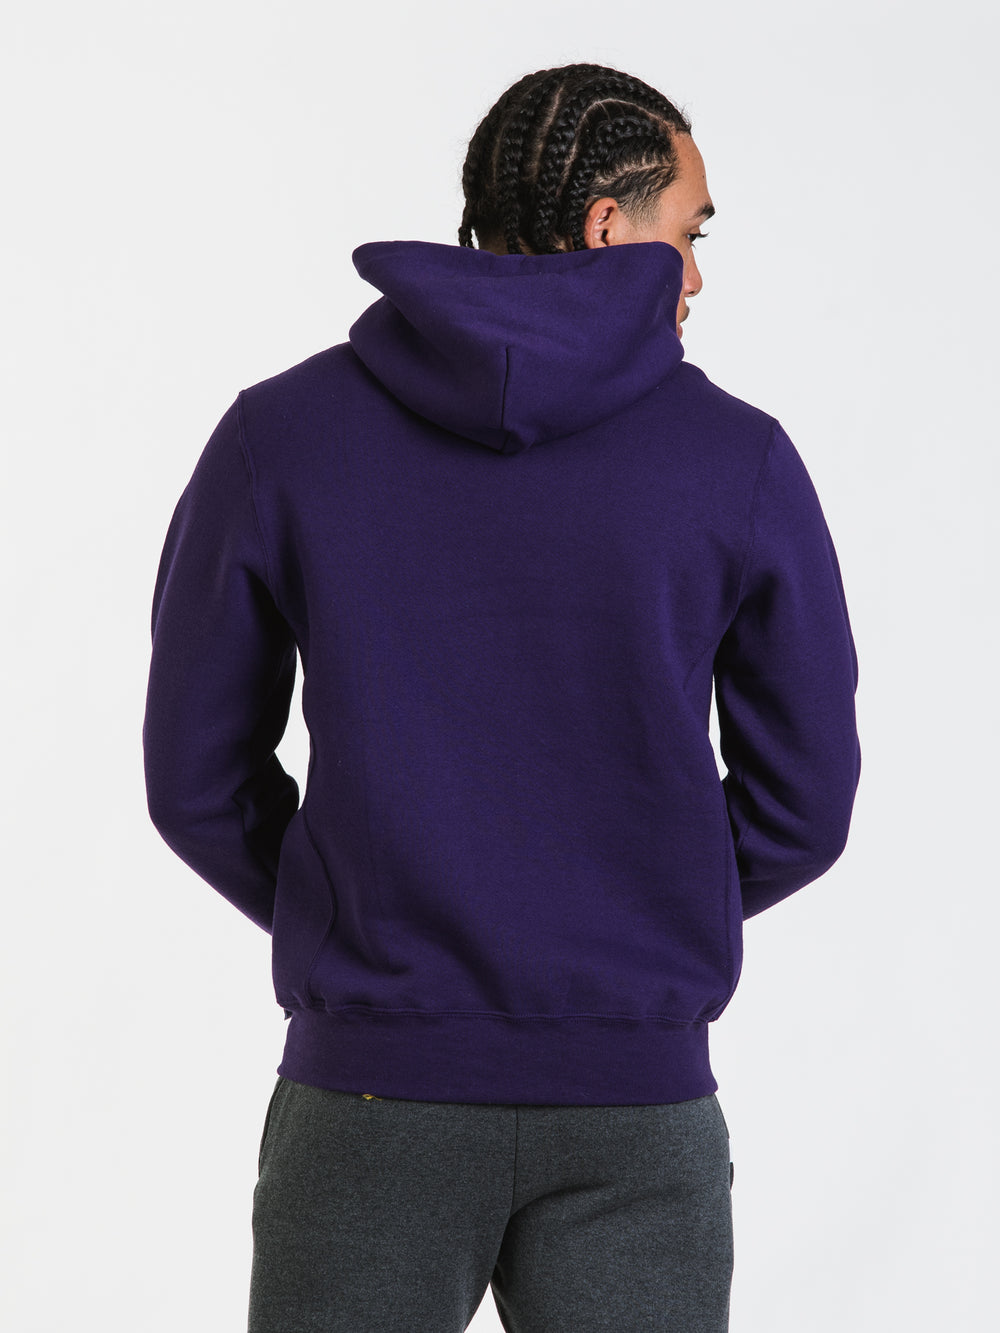 RUSSELL LSU PULLOVER HOODIE - CLEARANCE